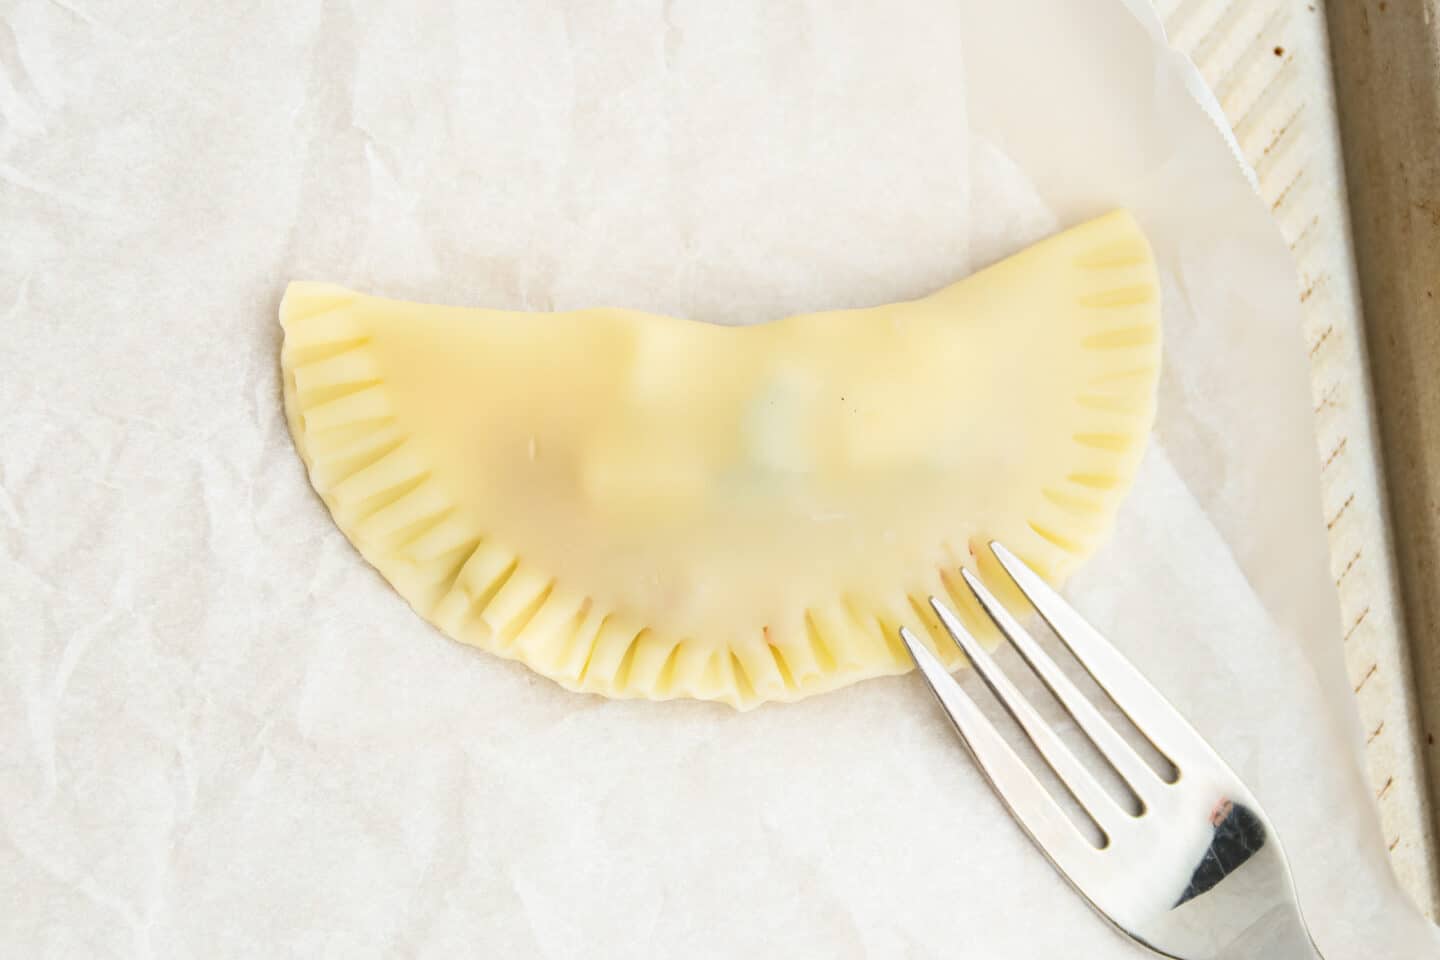 This is a picture of an empanada being sealed with a fork.